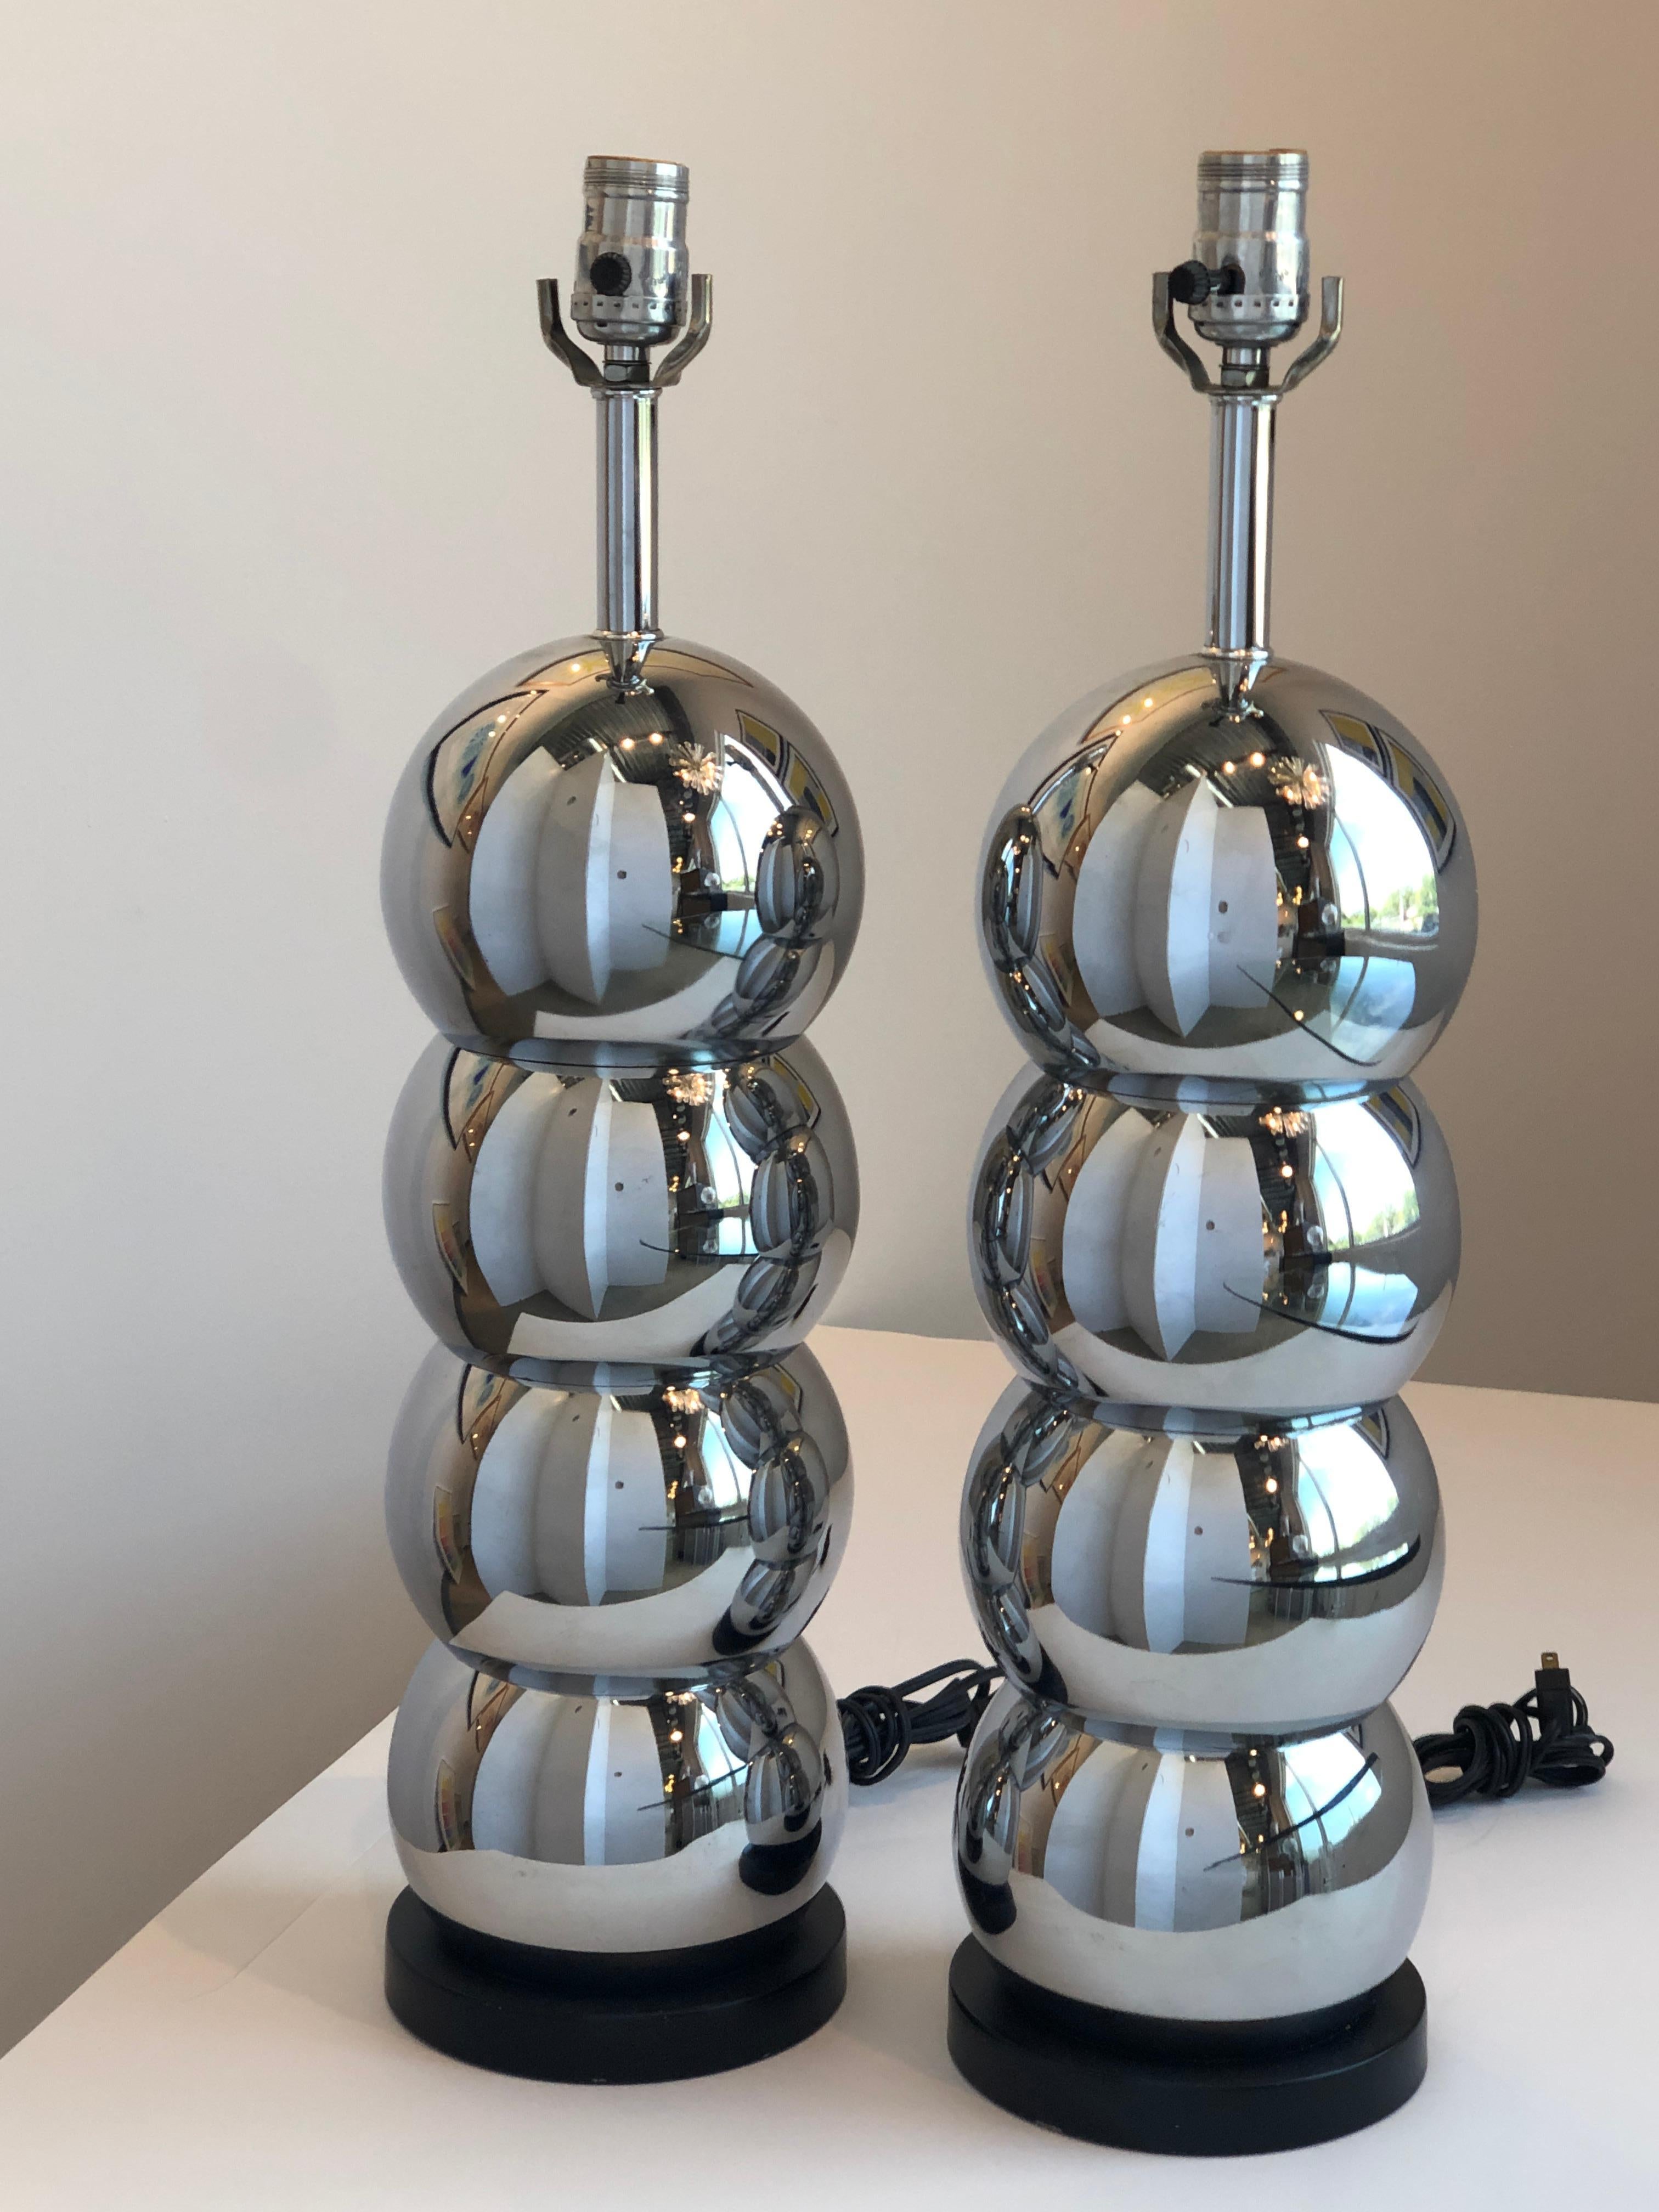 Mid-Century Modern Pr George Kovacs Silver Chrome Plate Stacking Ball Table Lamps & Black Wood Base For Sale